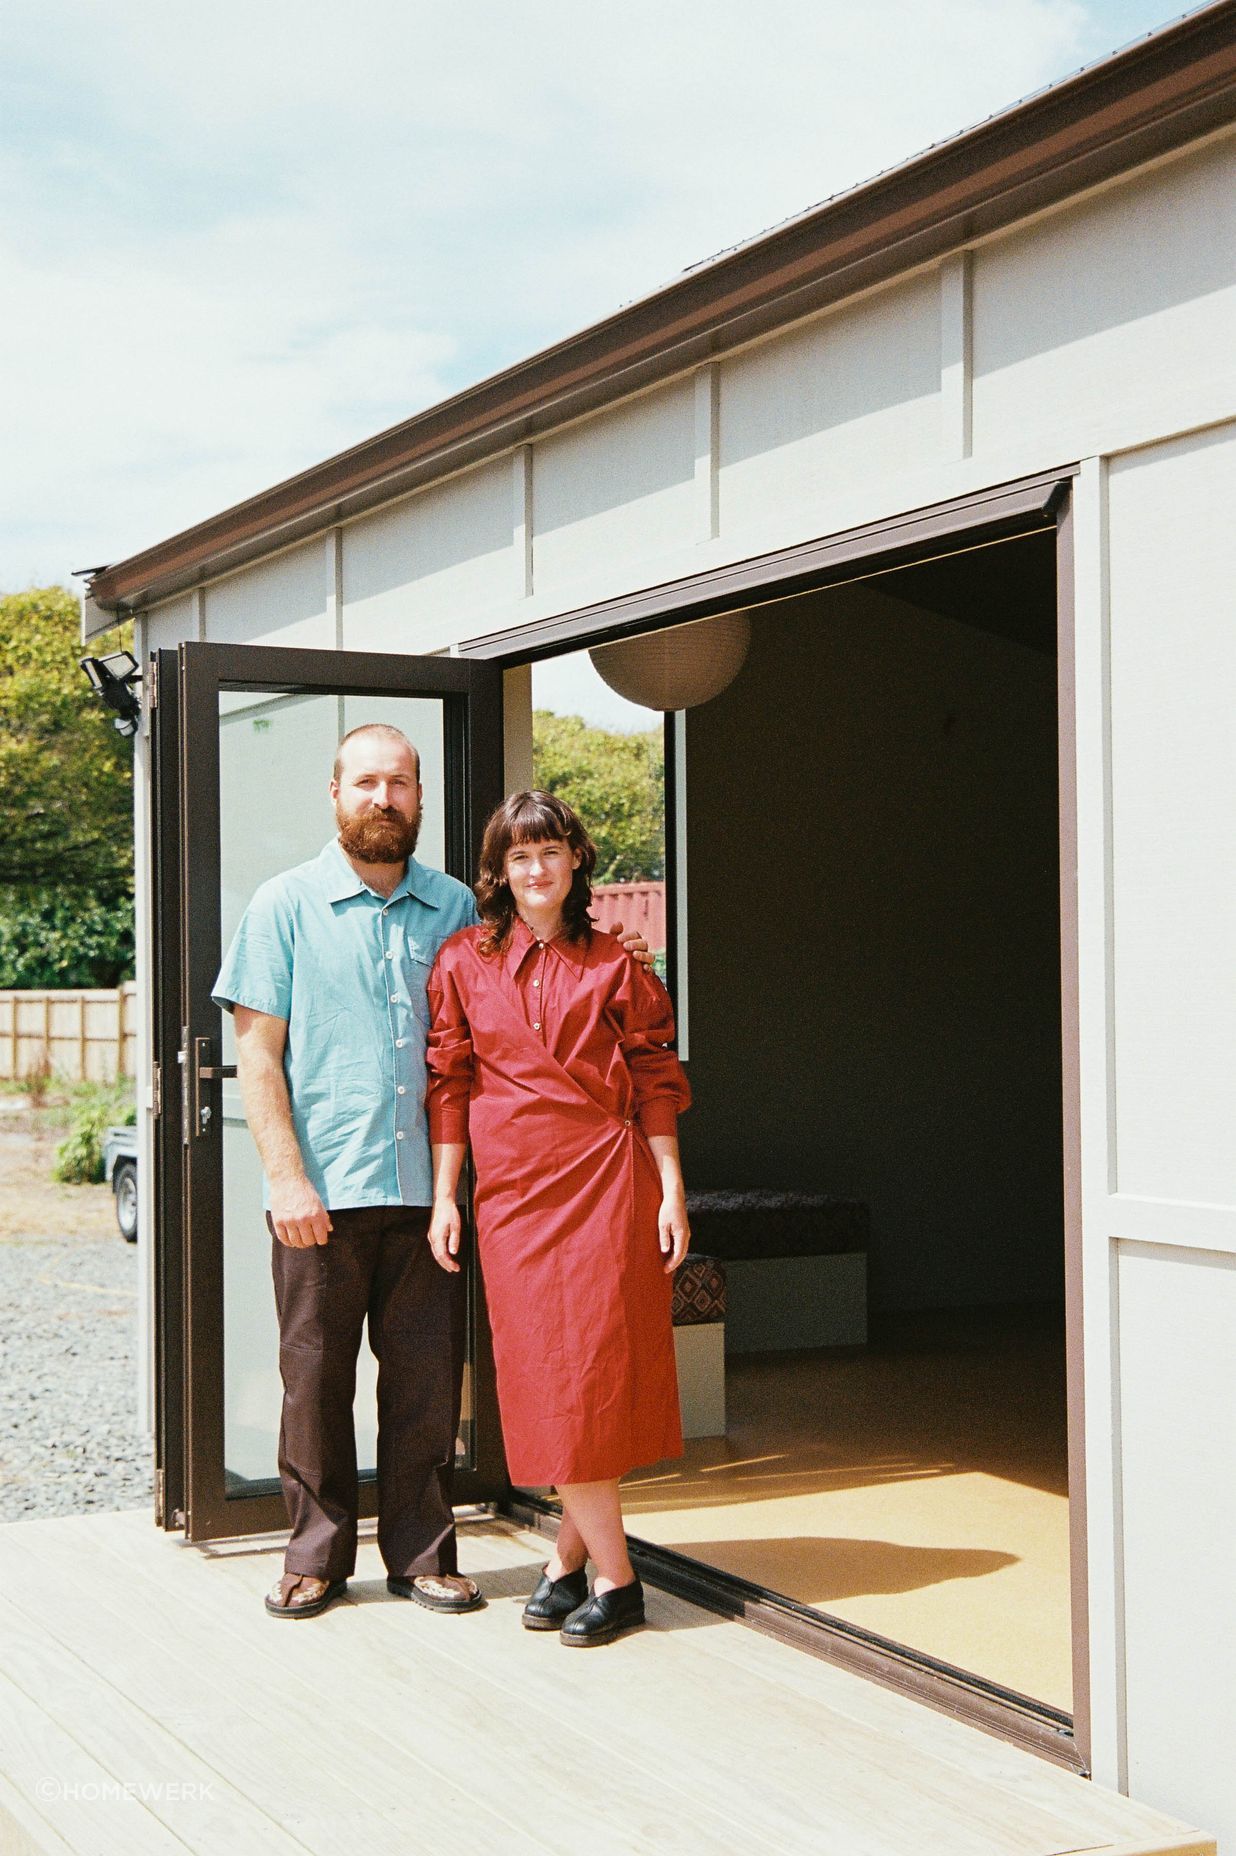 Starr (left) and Scapens (right) stand at the entrance to a completed Homewerk cabin.